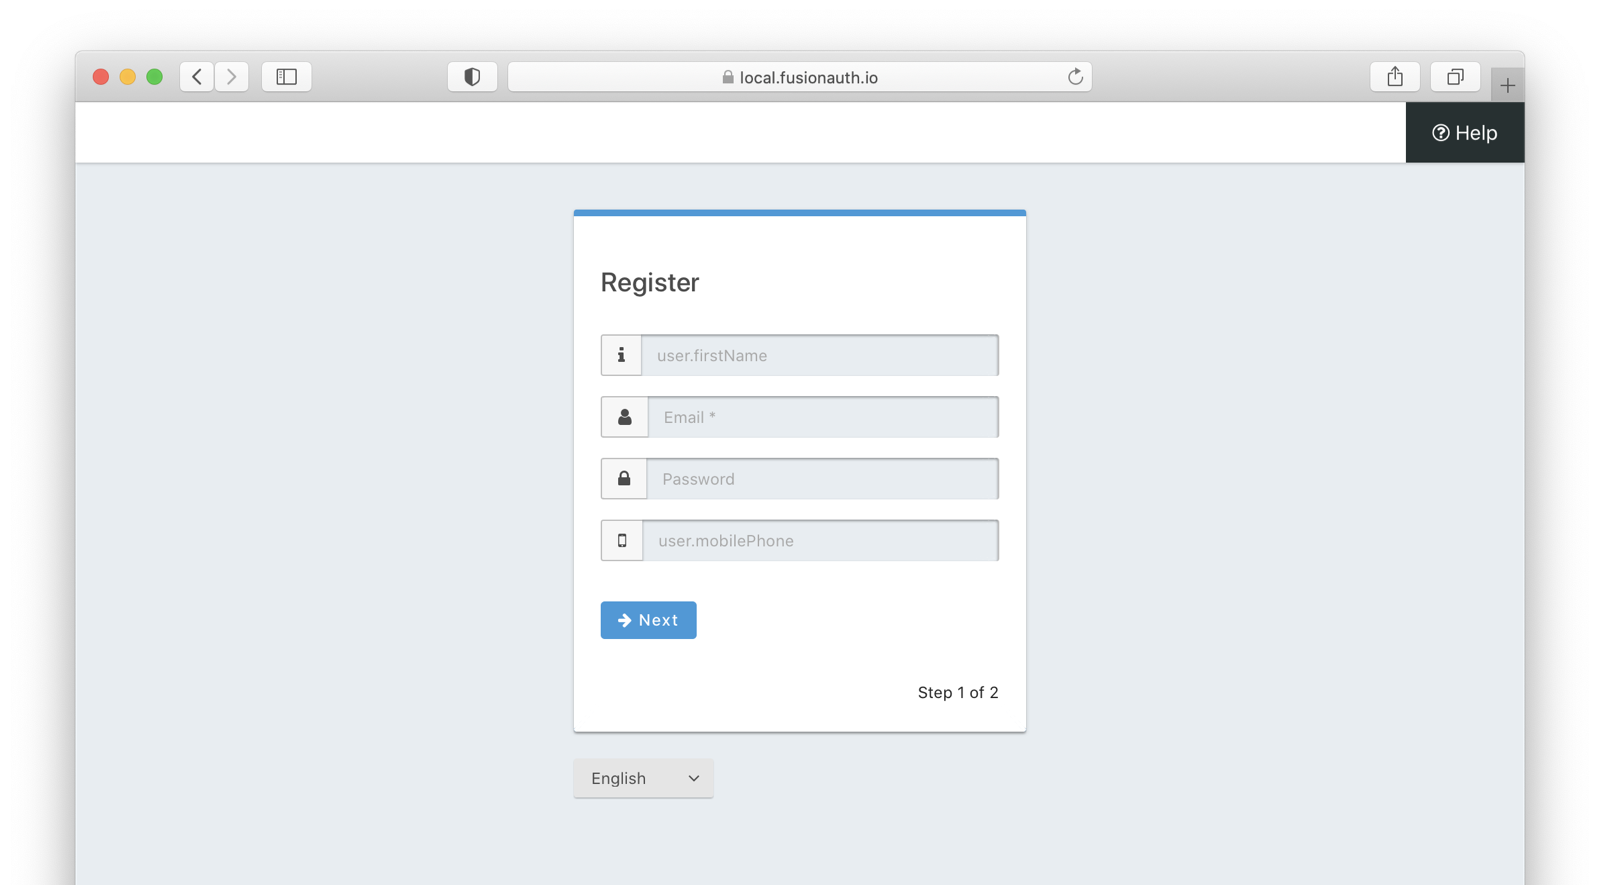 The first page of the custom registration flow.